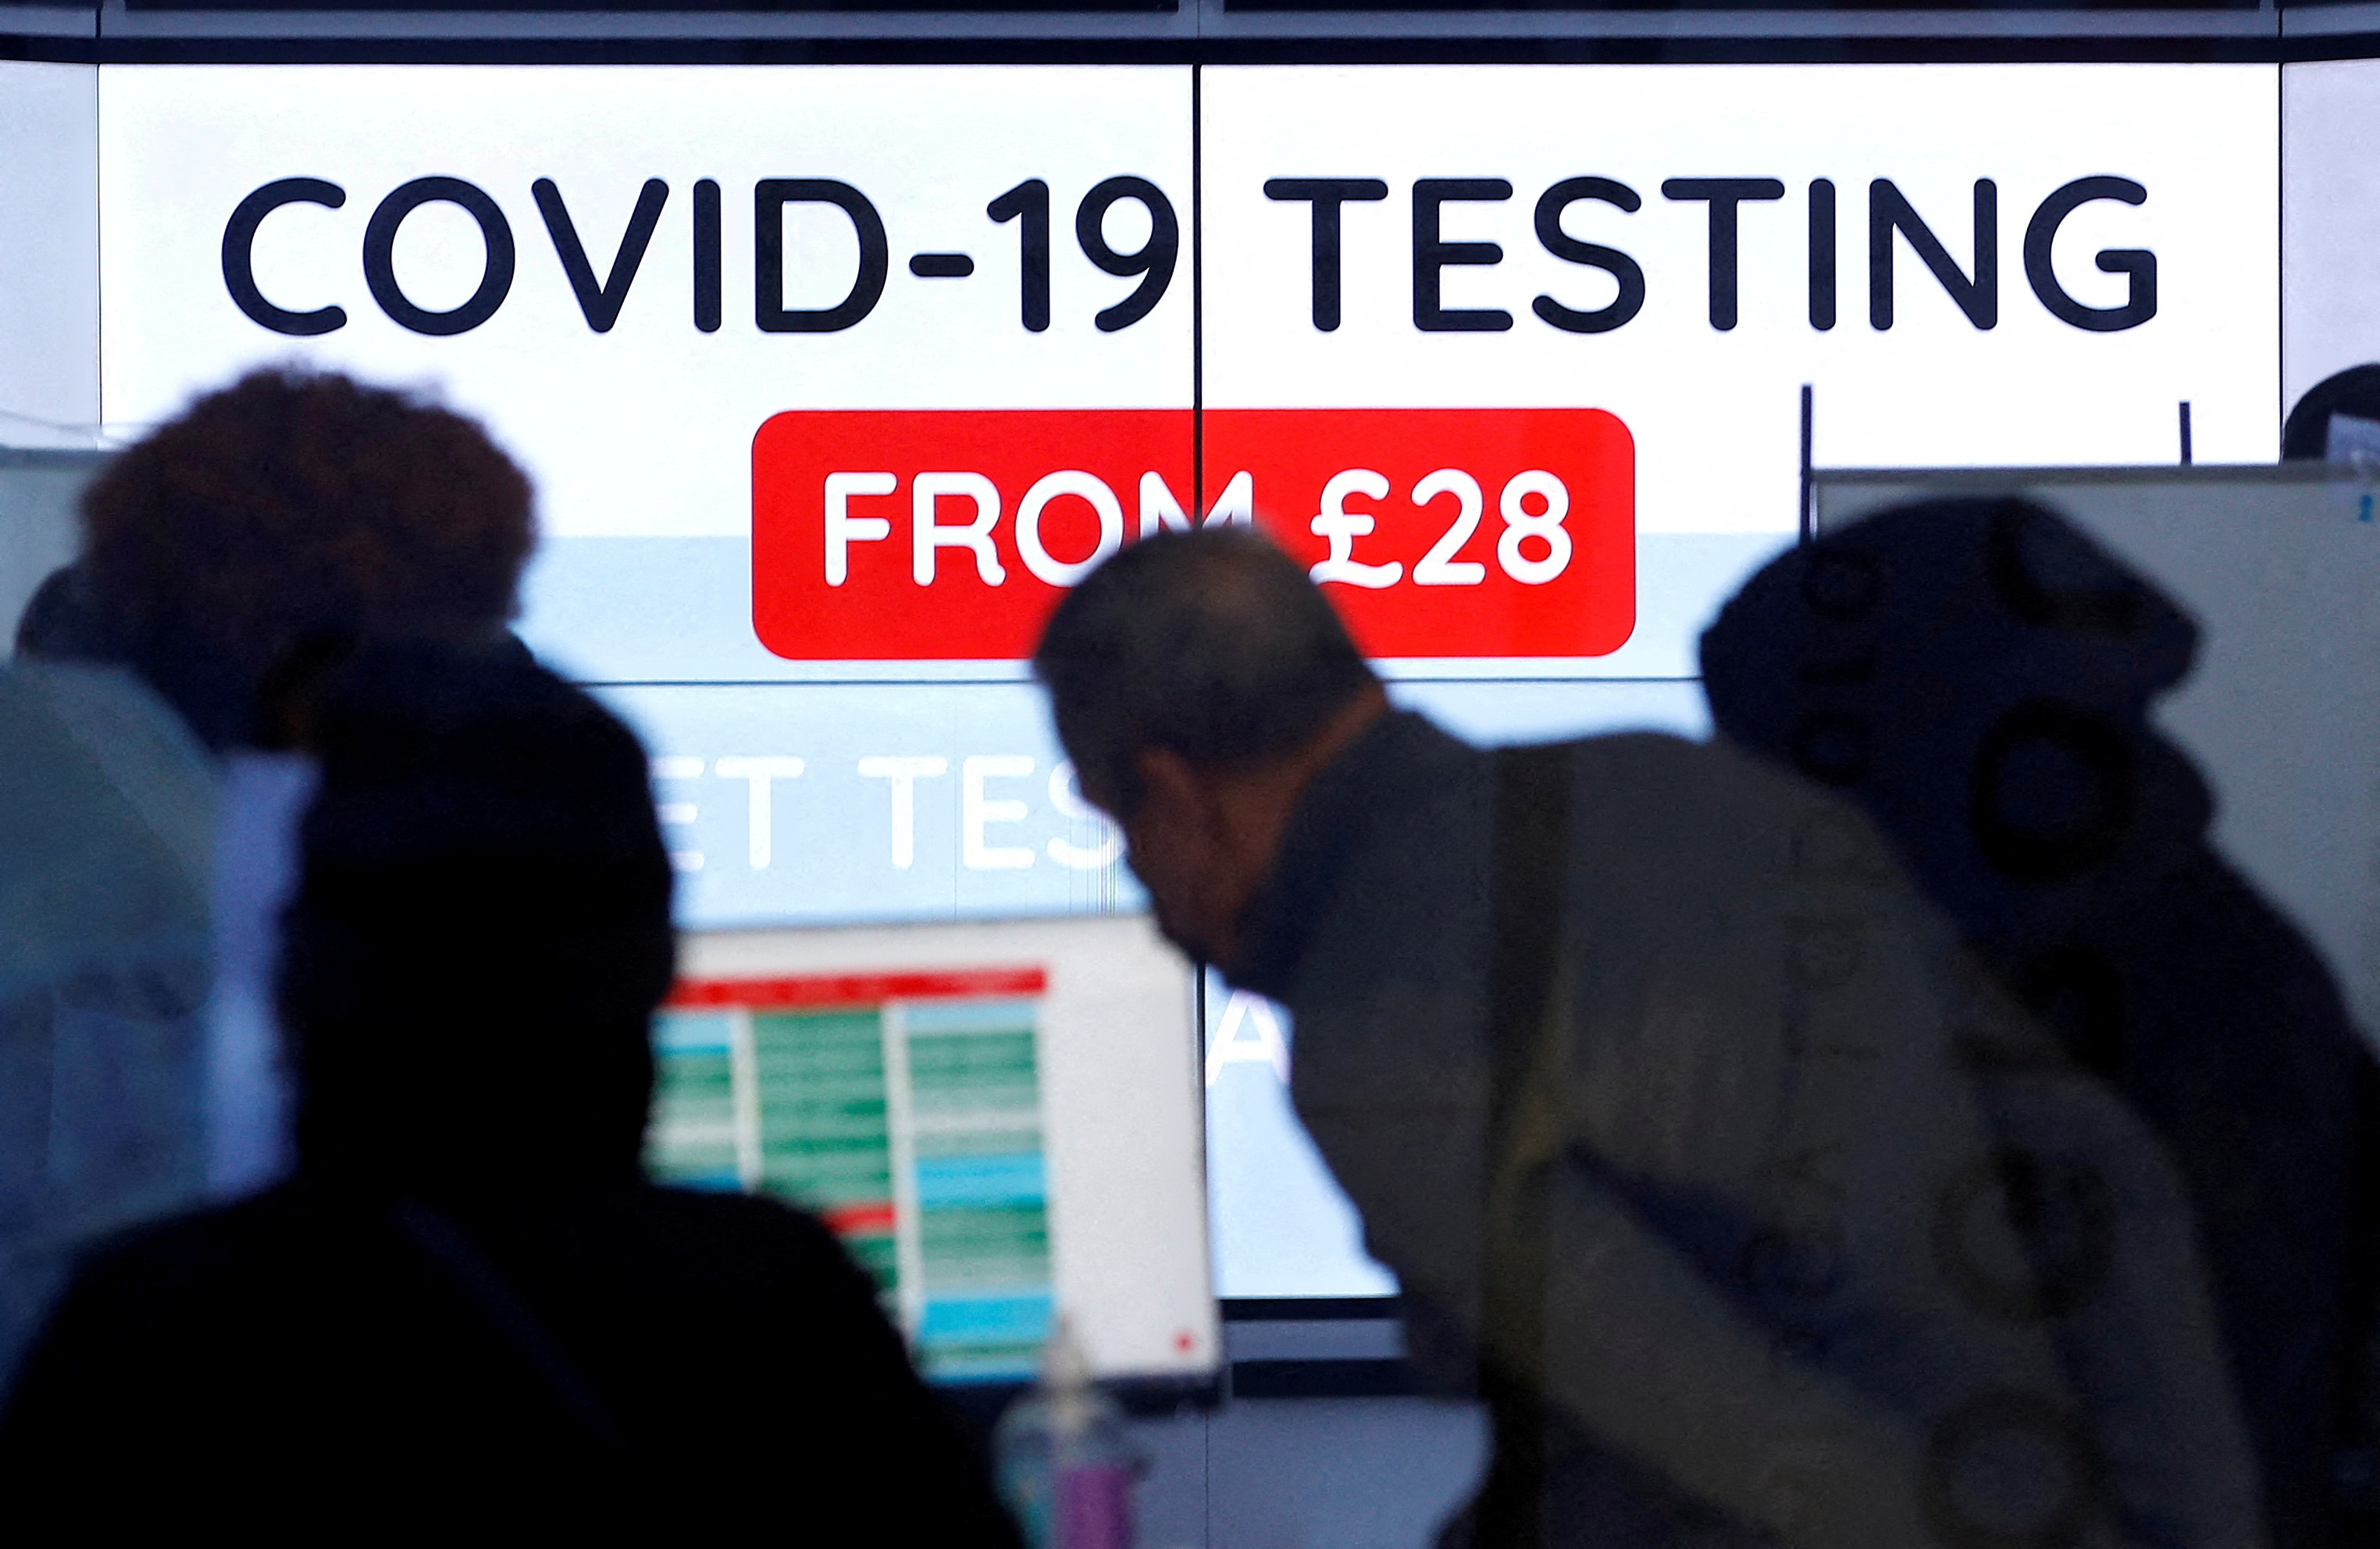 Customers are seen inside a private COVID-19 testing clinic in a busy shopping area, amid the coronavirus disease (COVID-19) outbreak in London